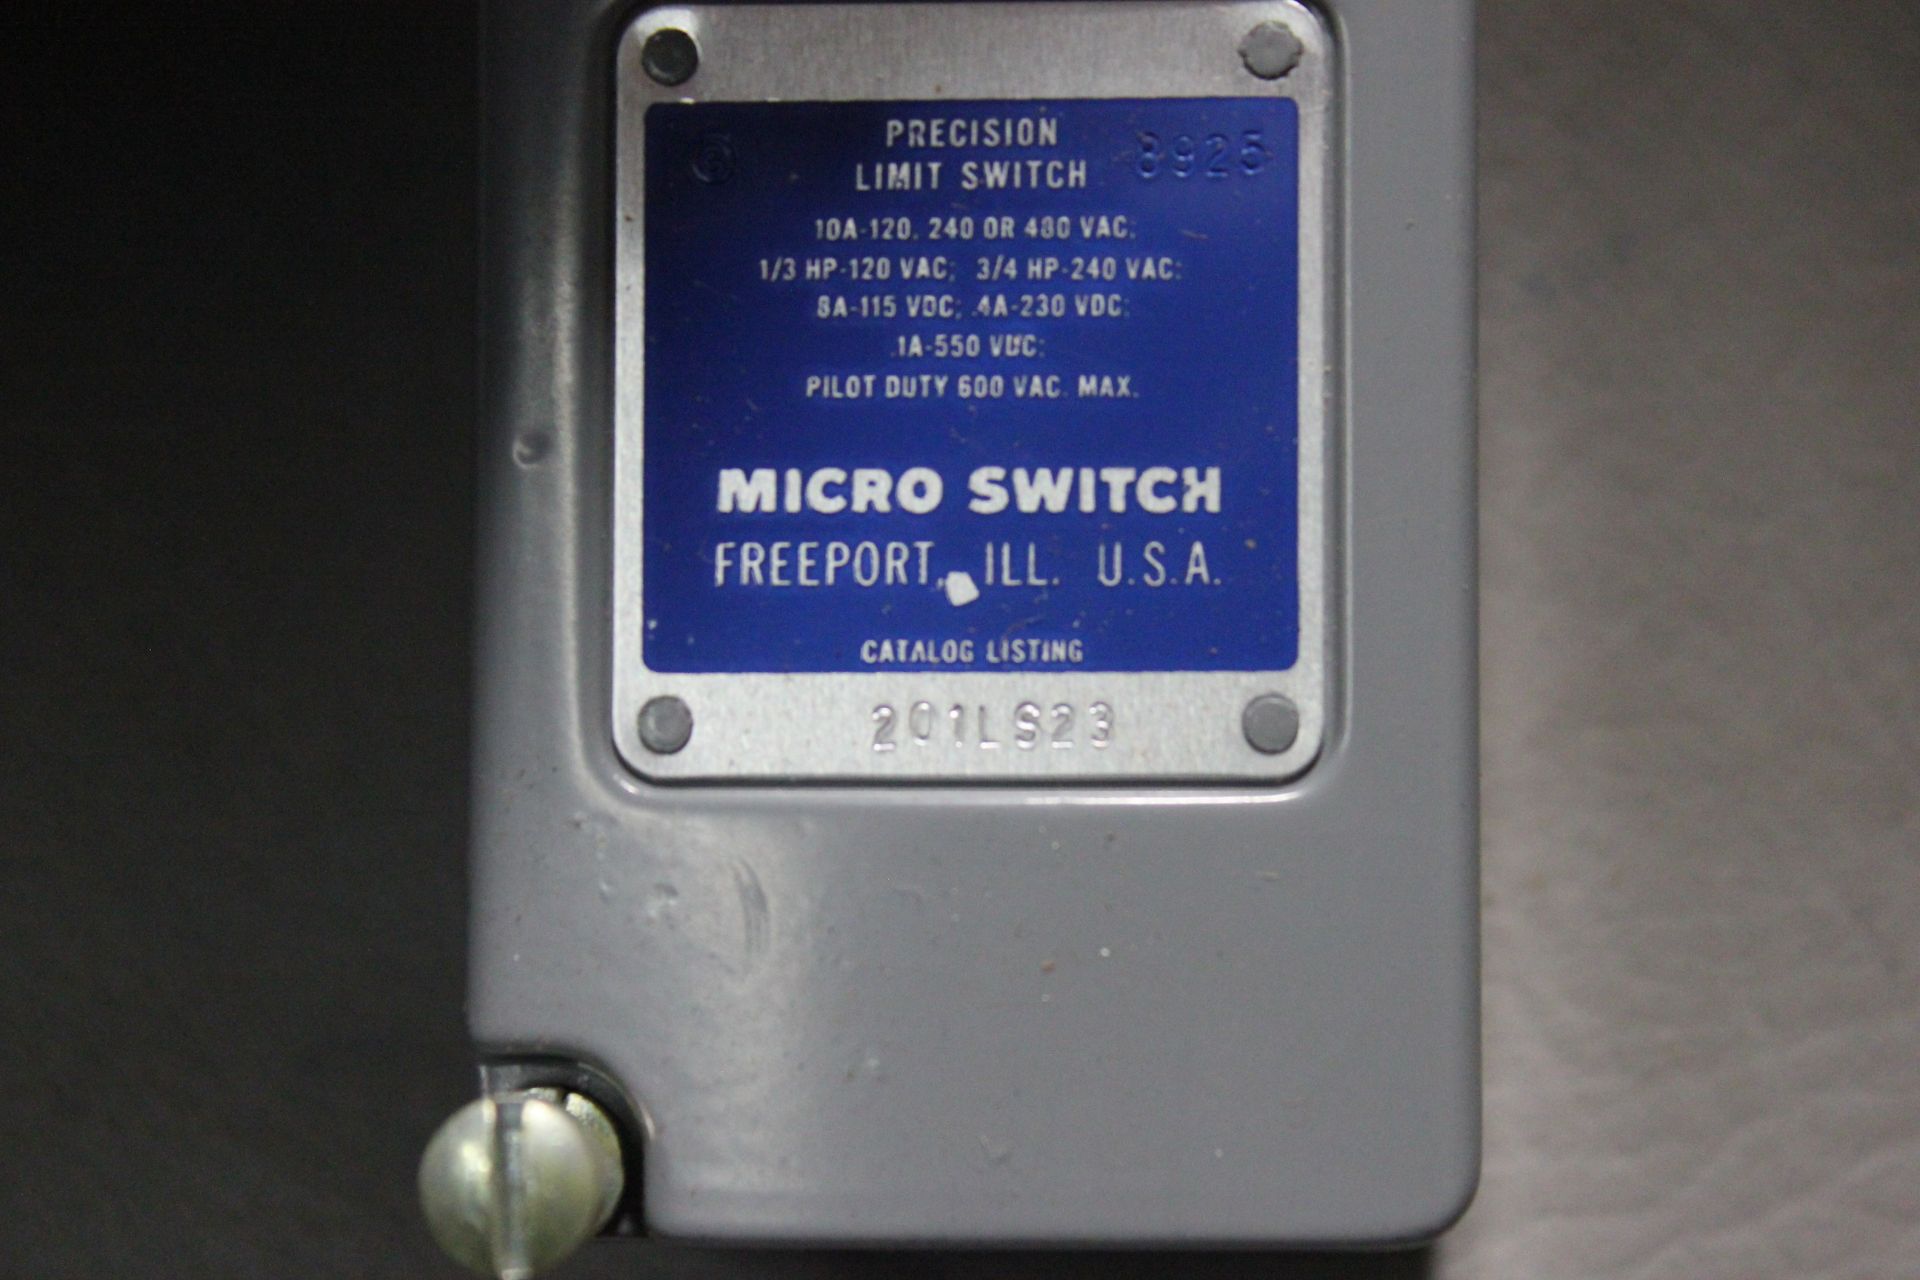 NEW OLD STOCK MIRCO SWITCH PRECISION LIMIT SWITCH - Image 3 of 4